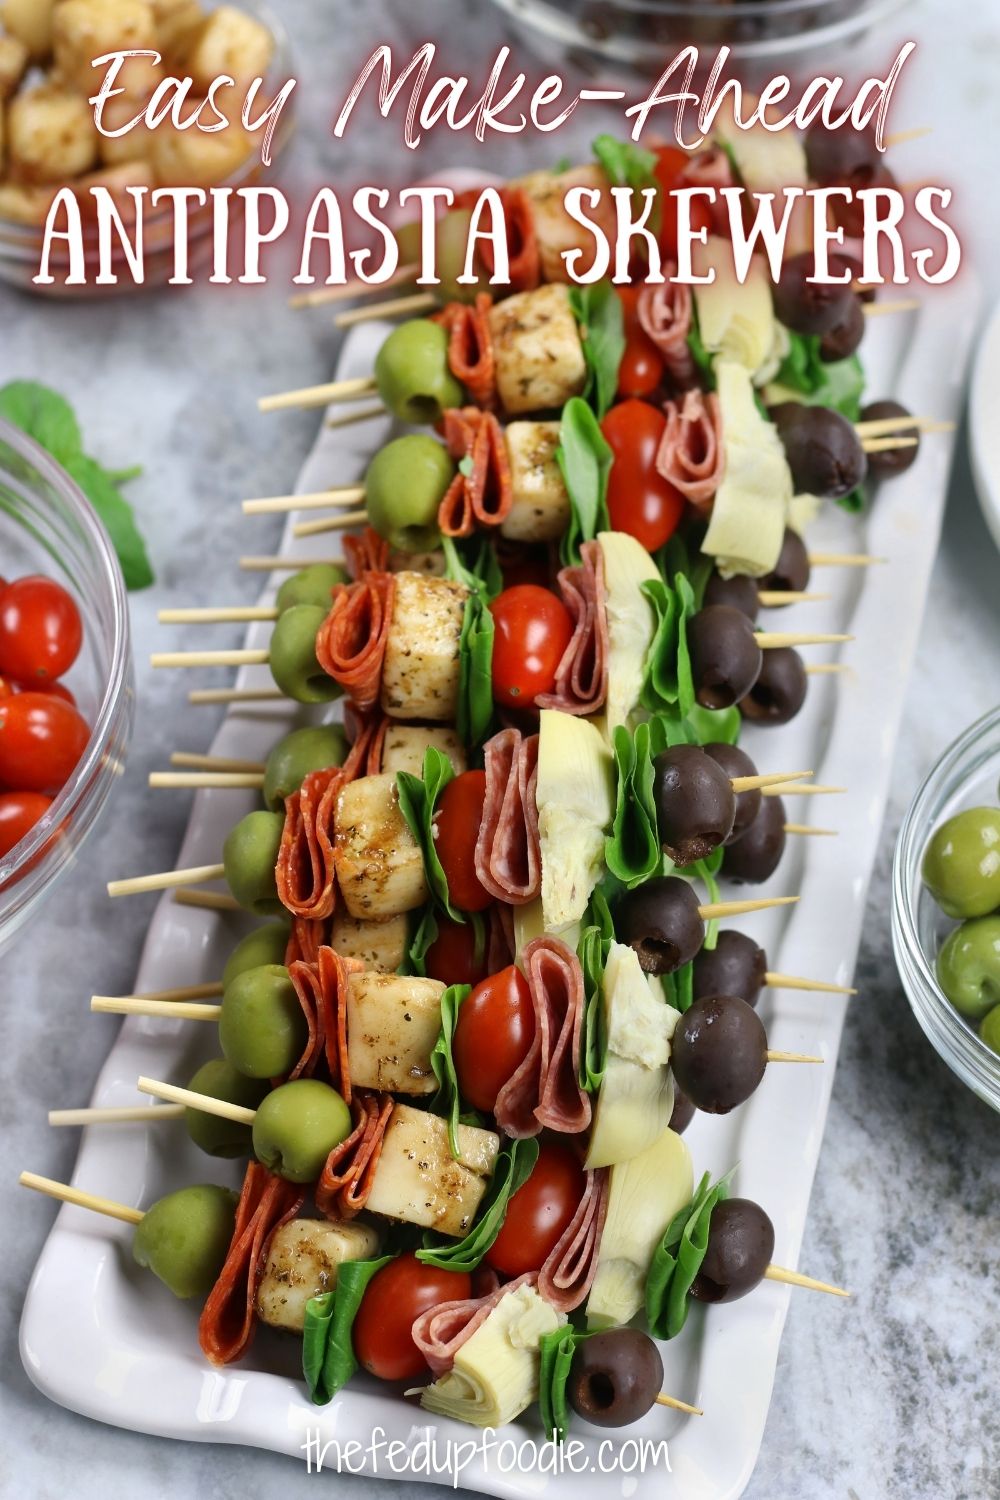 These easy Antipasta Skewers are a delicious cold make-ahead appetizer that are always a crowd pleaser. Perfect for the holidays, summer parties or watching Super Bowl. Included are secrets for the tastiest and most affordable way to make an appetizer on a stick. 
#AntipastoSkewers #AntipastaSkewer #AntipastoSkewersAppetizers #SuperEasyAppetizers #ColdAppetizersForPartyMakeAhead #AppetizersOnAStick #ToothpickAppetizersEasyCold 